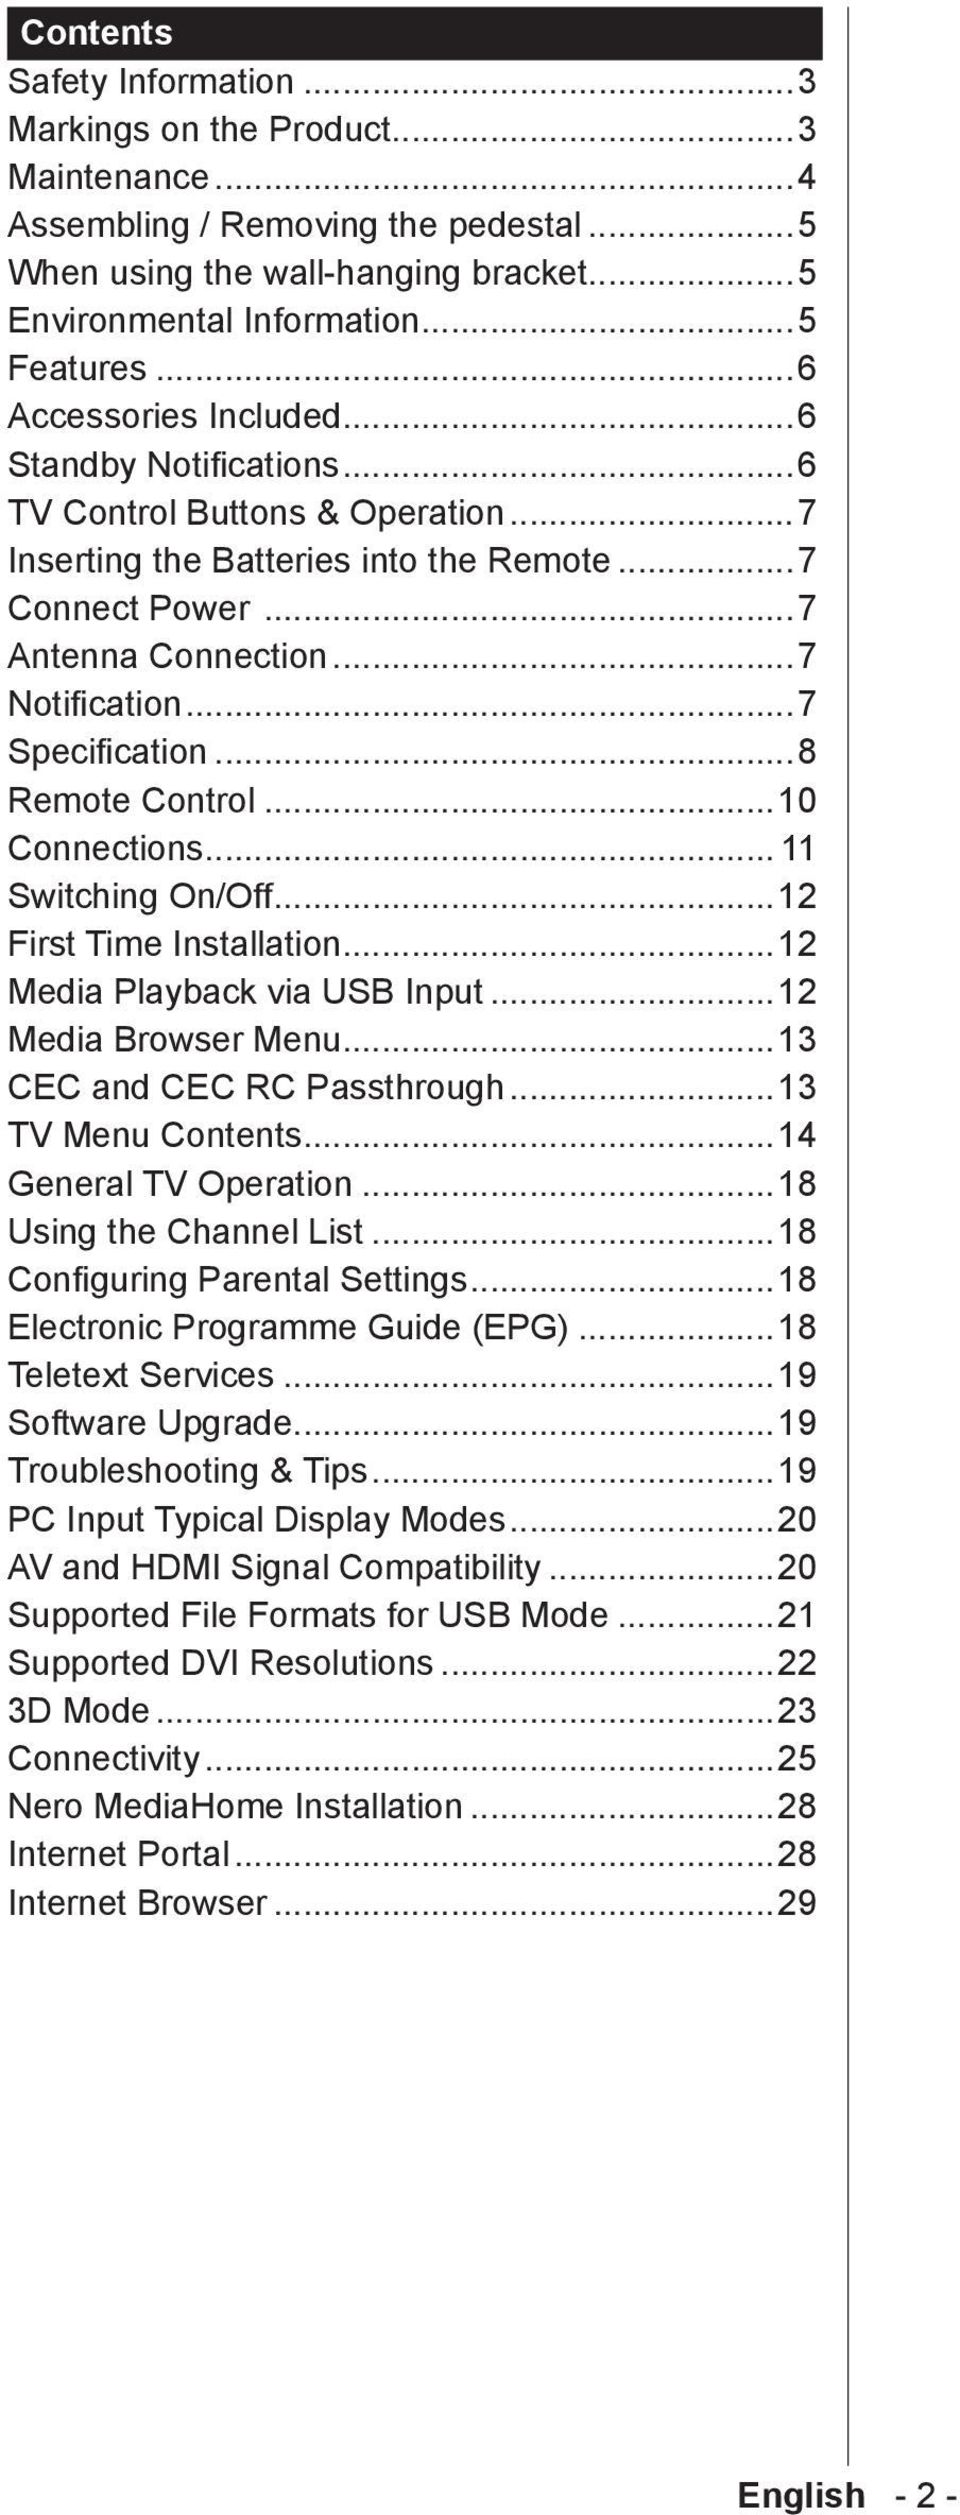 ..7 Specification...8 Remote Control...10 Connections... 11 Switching On/Off...12 First Time Installation...12 Media Playback via USB Input...12 Media Browser Menu...13 CEC and CEC RC Passthrough.